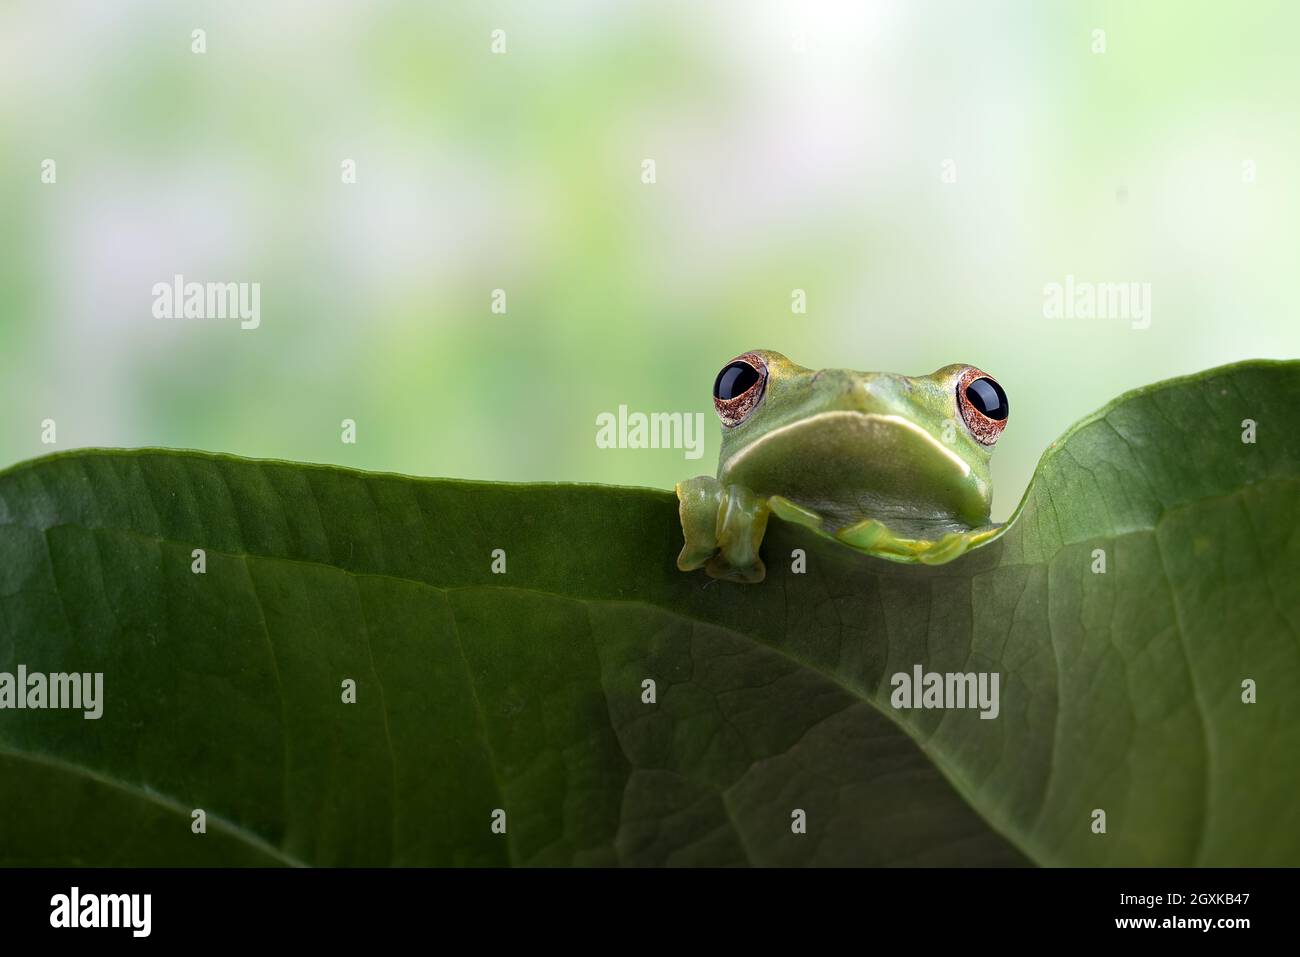 Malayan tree frog peeking over the edge of an Anthurium leaf, Indonesia Stock Photo